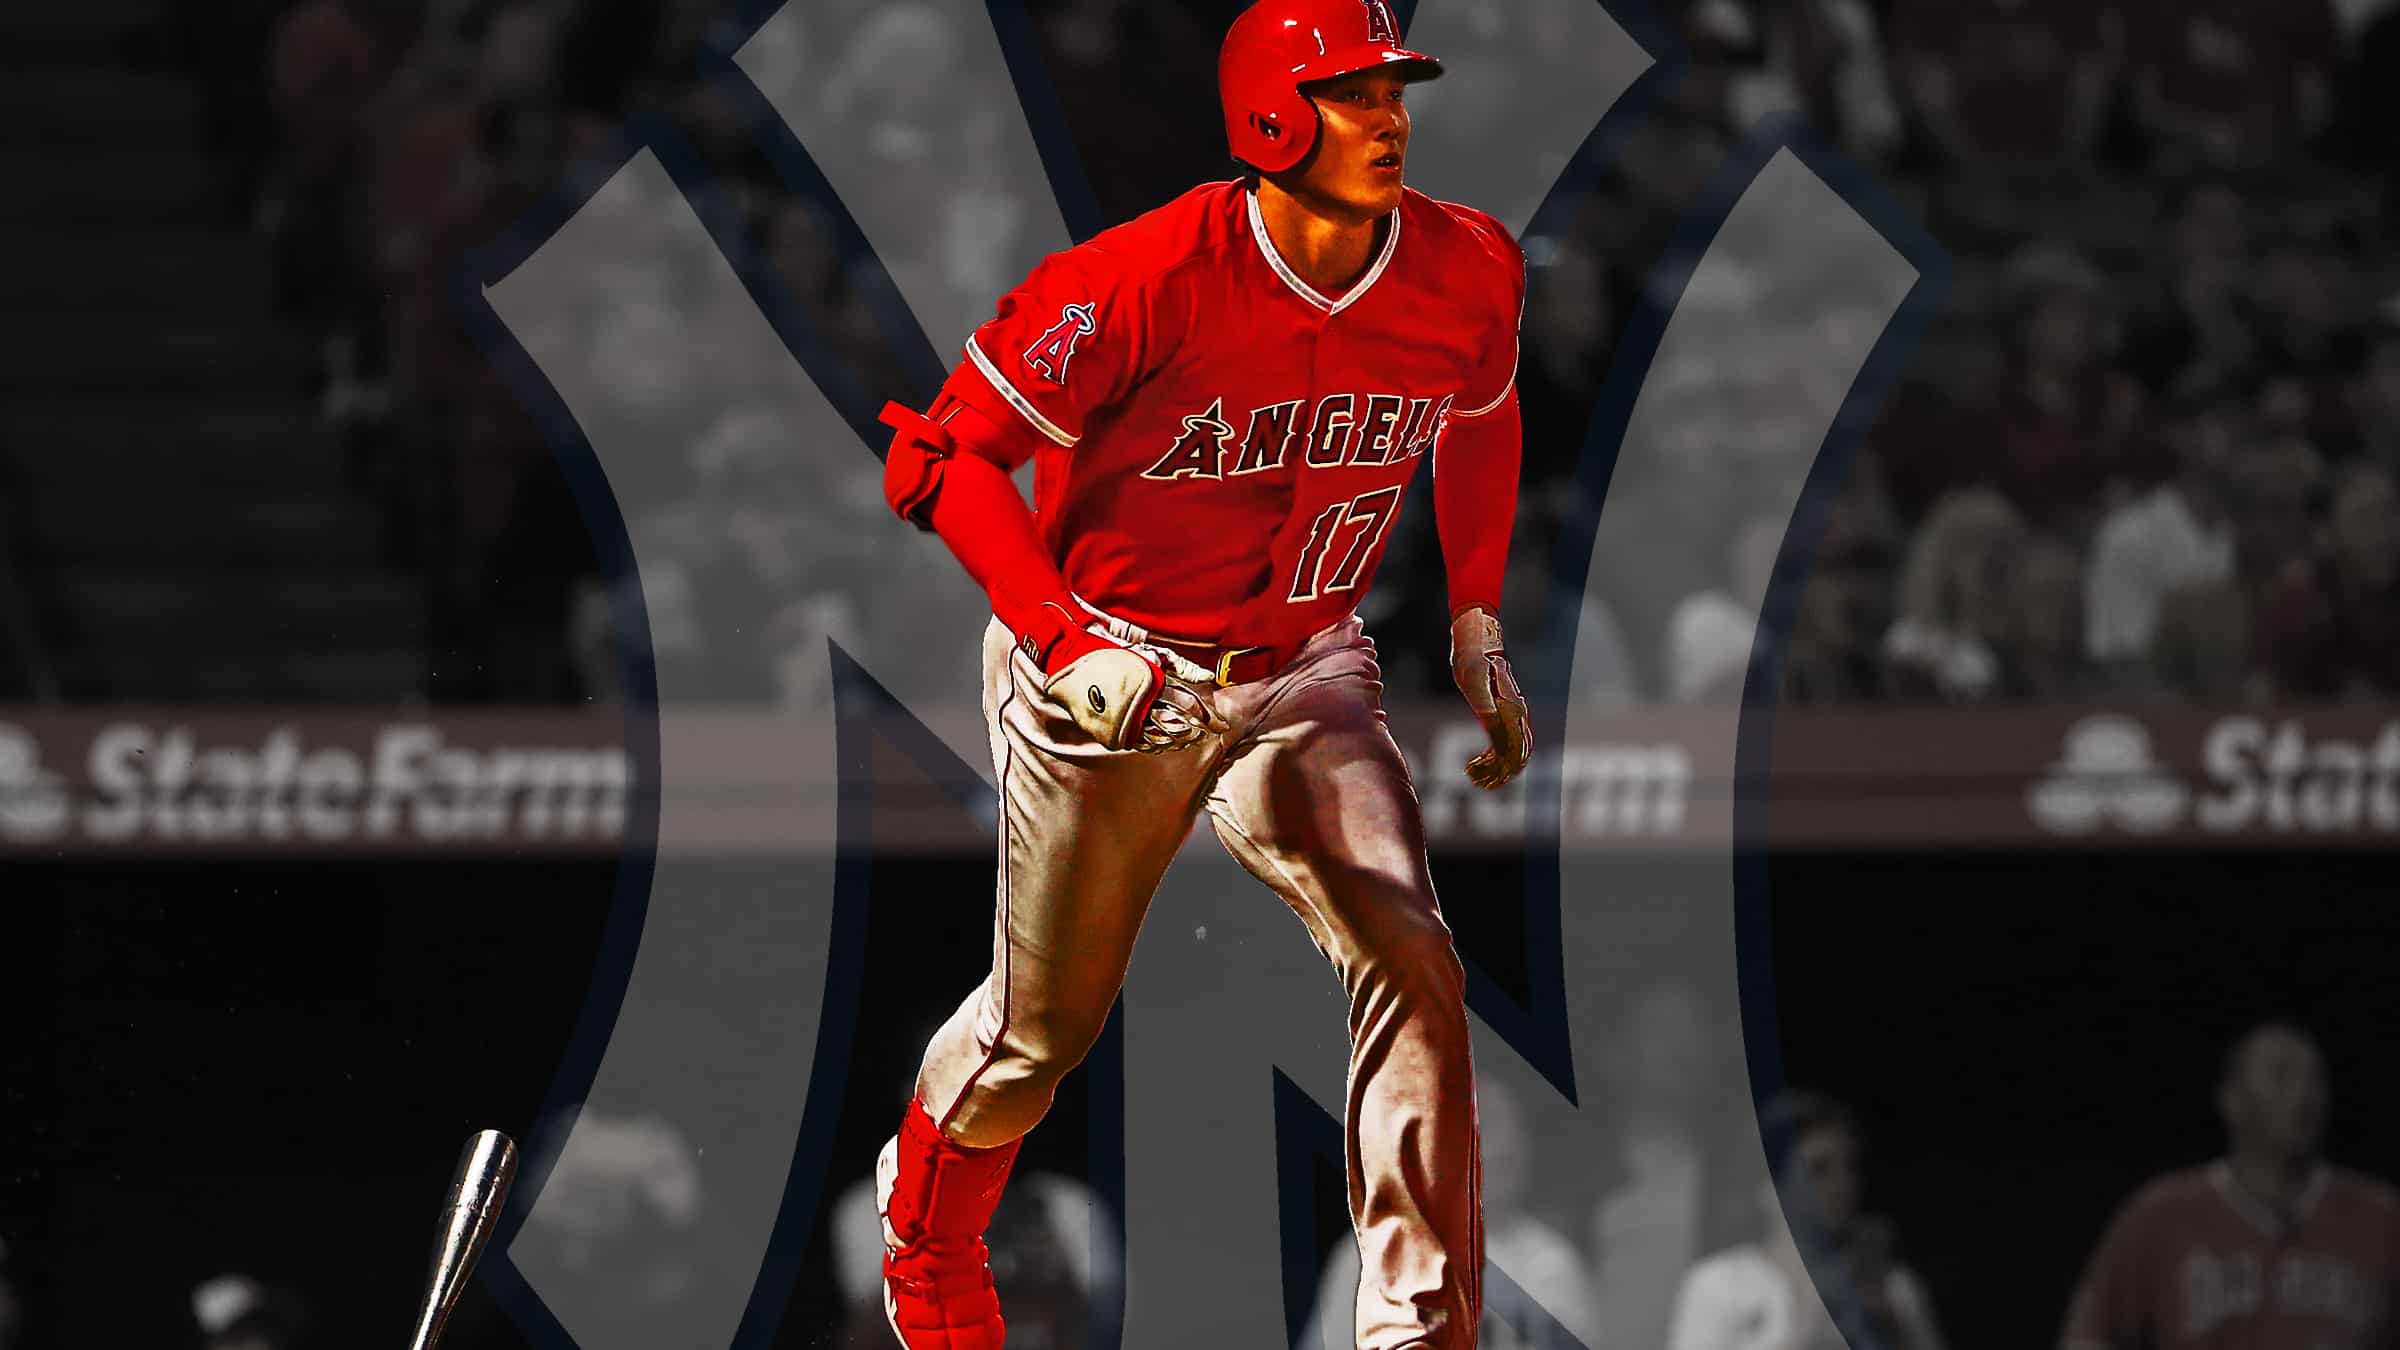 Shohei Ohtani Angels Wallpapers - Wallpaper Cave